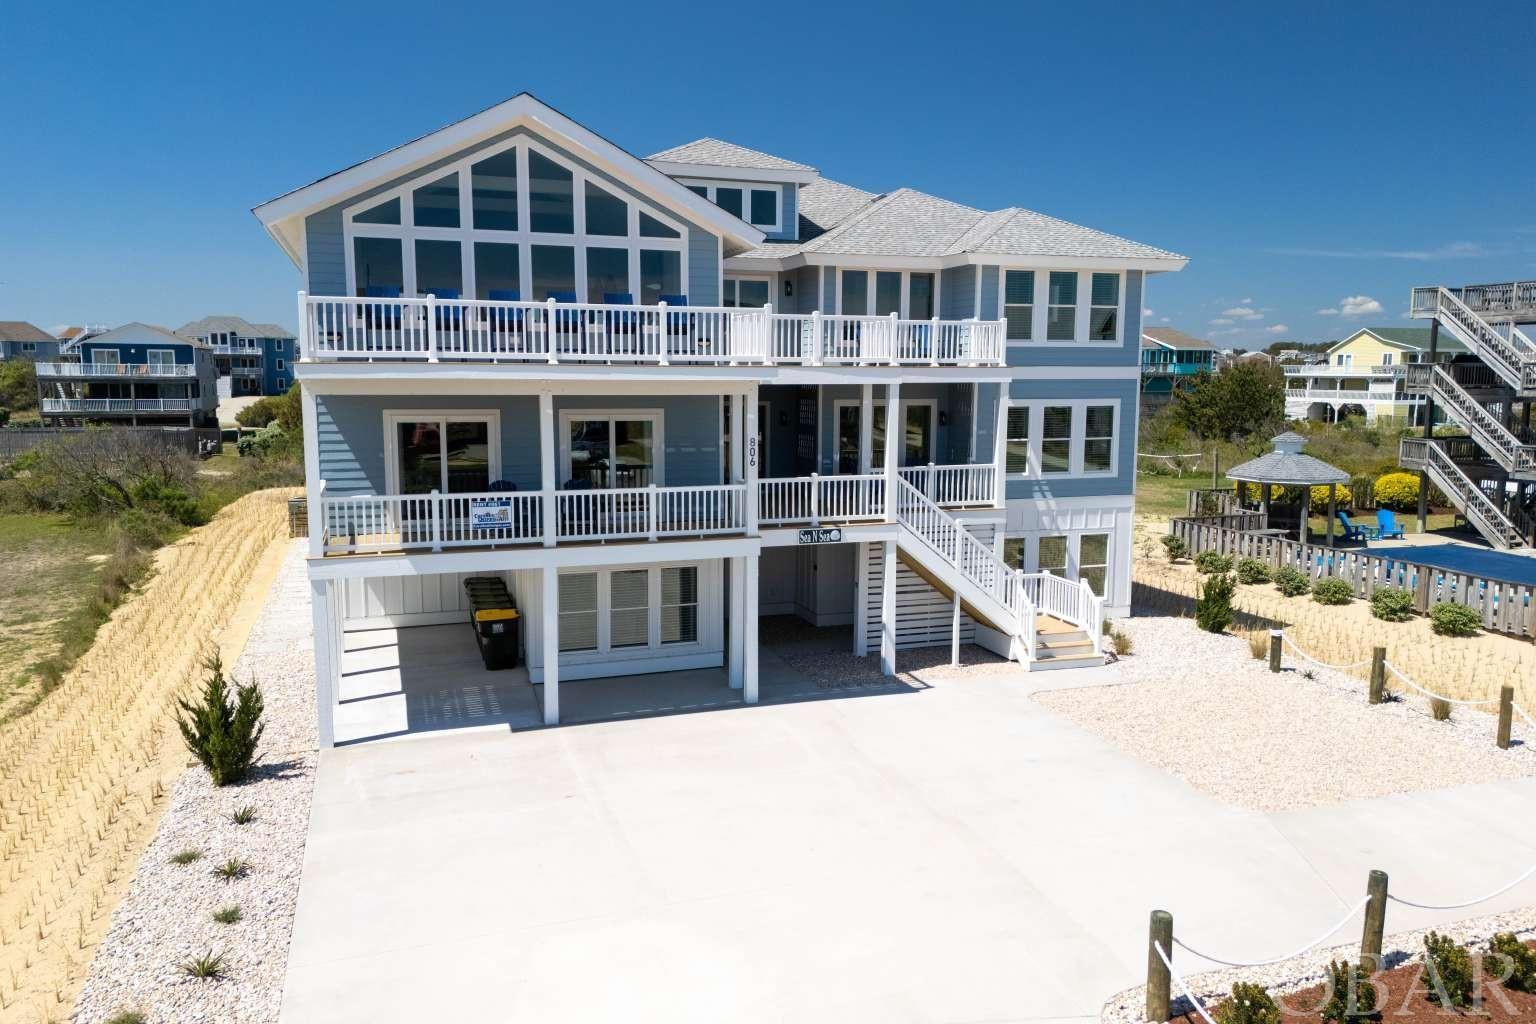 This brand-new semi-oceanfront estate in popular Whalehead Beach is sure to impress. Designed and built by Finch & Company, this fully furnished 12-bedroom home features spectacular unobstructed ocean views, and each bedroom includes its own private, custom tiled bathroom. With over 7600 square feet, there is an abundance of gathering spaces and oversized bedrooms for large groups to spread out and enjoy themselves, along with an elevator to easily navigate throughout the home. The layout features three spacious, coastal-inspired levels, professionally designed for both comfort and entertainment. The top floor offers an open concept with cathedral ceilings and large picture windows, bringing in an abundance of natural light and offering sweeping ocean views. The spacious gourmet kitchen includes a large center island, double ovens, 6 burner professional cooktop, two dishwashers and refrigerators, quartz counters, custom shaker cabinets, and 15ft custom dining table with seating for 18. The living area includes custom built bench seating, conversation seating area for 4, and extra-large sectional sofa, perfect for gathering around the large screen TV or taking in the amazing views from the large picture windows. Rounding out the top floor includes front and back decks for alfresco dining, separate sitting area, and three master ensuites. The mid-level includes six well appointed ensuite bedrooms all of which were designed for space and comfort, including an oversized custom built bunk room with four twin and four full sized bunks. A large media room with wet bar, private office, and plenty of front and back deck seating round out the mid-level. The ground floor offers a nicely sized theater room with Italian leather seats, 85-inch TV, and Sonos sound system. The rec room includes a pool table, shuffleboard table, stand up arcade with 10,000 games, 75-inch TV, conversation seating, wet bar, professional ice maker, and full-sized refrigerator. There is also a custom installed Sonos sound system inside and out which operates easily from an app on your phone. Outside amenities abound with a heated salt water pool with sun shelf and in-pool bar stools, perfect for staying cool on those warm summer days. Two large covered cabanas include bar and lounge seating, perfect for keeping the party going all day long. Enhancing your poolside experience includes a large flat-screen TV, outdoor speakers, hot tub, ping pong table, cornhole boards, and outdoor shower. The exterior was professionally landscaped with drip irrigation and easy to maintain plants ensuring the grounds look great with minimal supervision. All this while located in an X flood zone. Welcome Home.